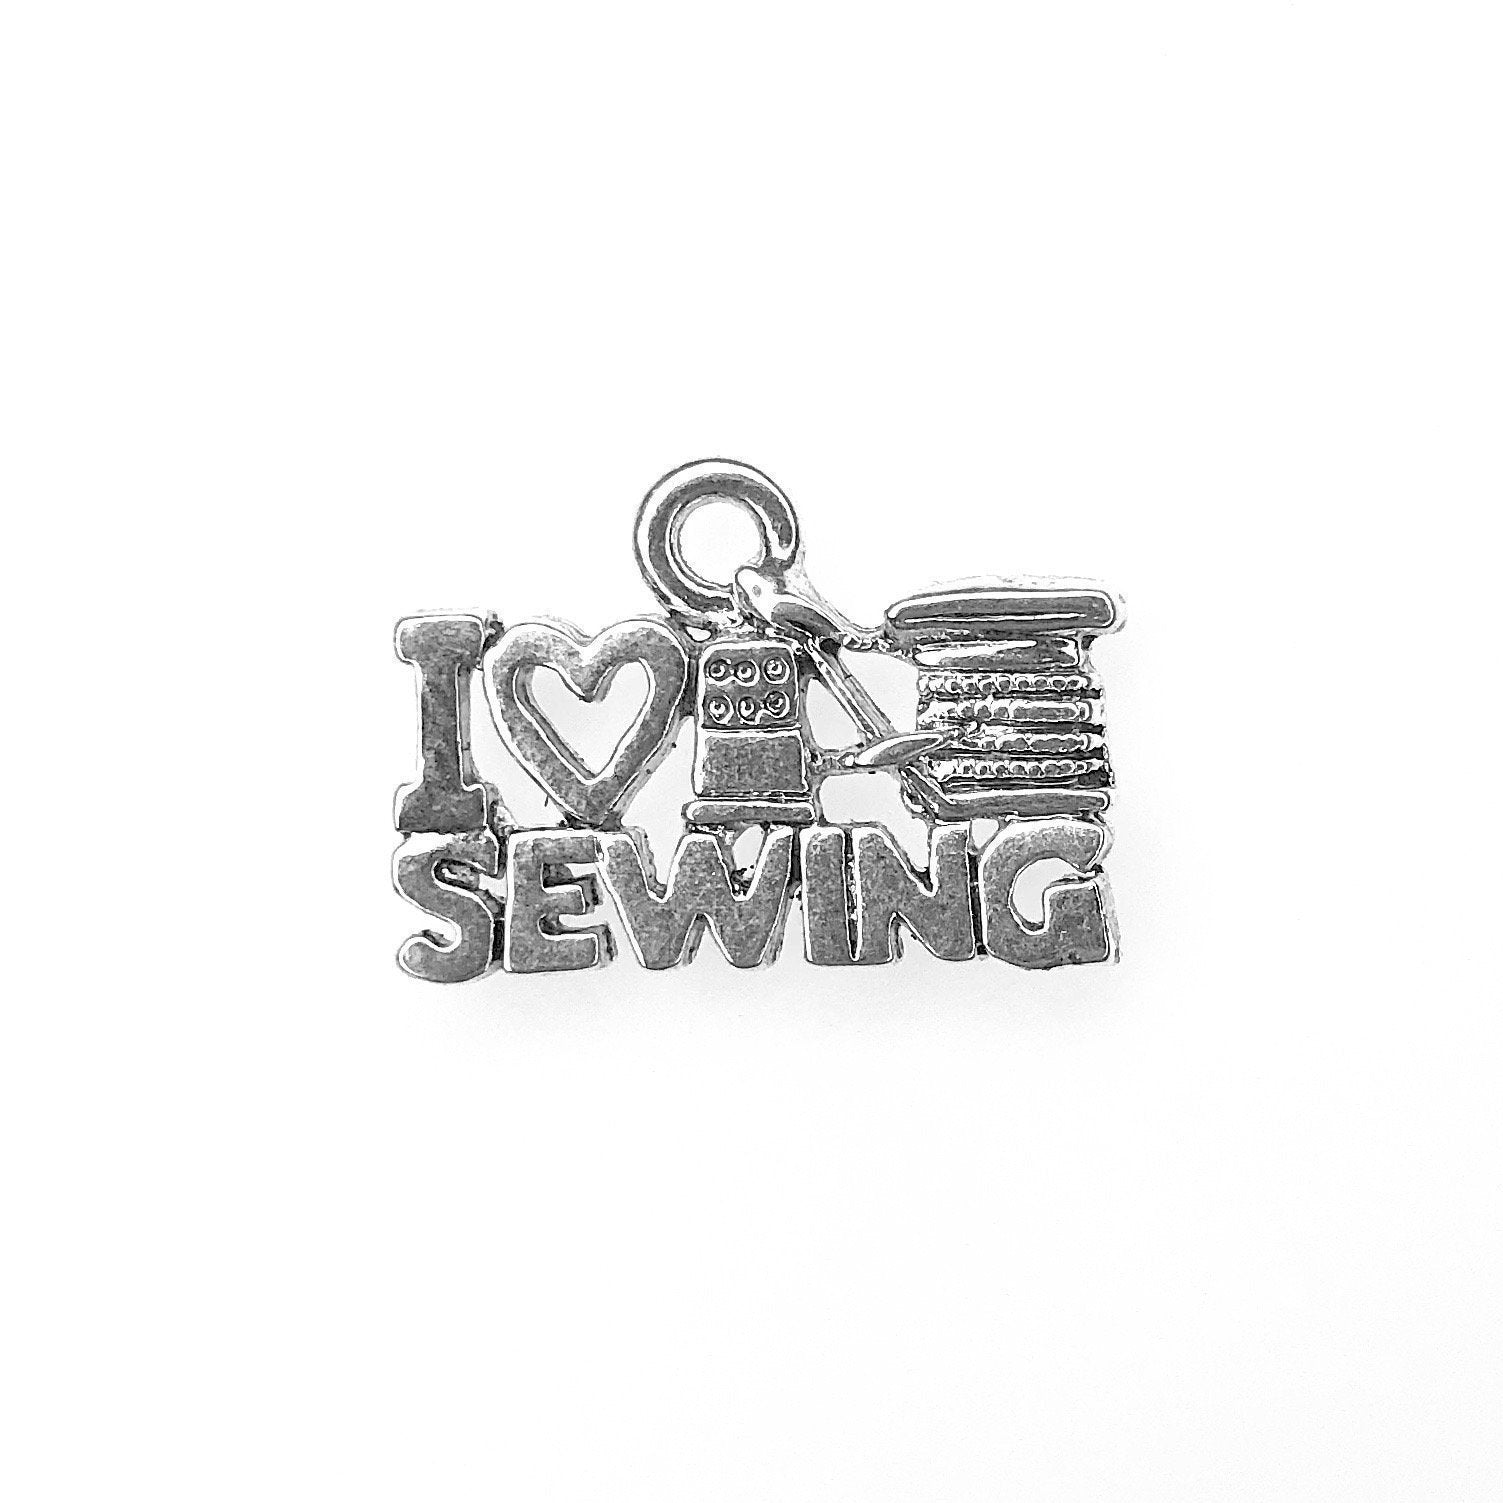 "I Love Sewing" Word Pewter Charm